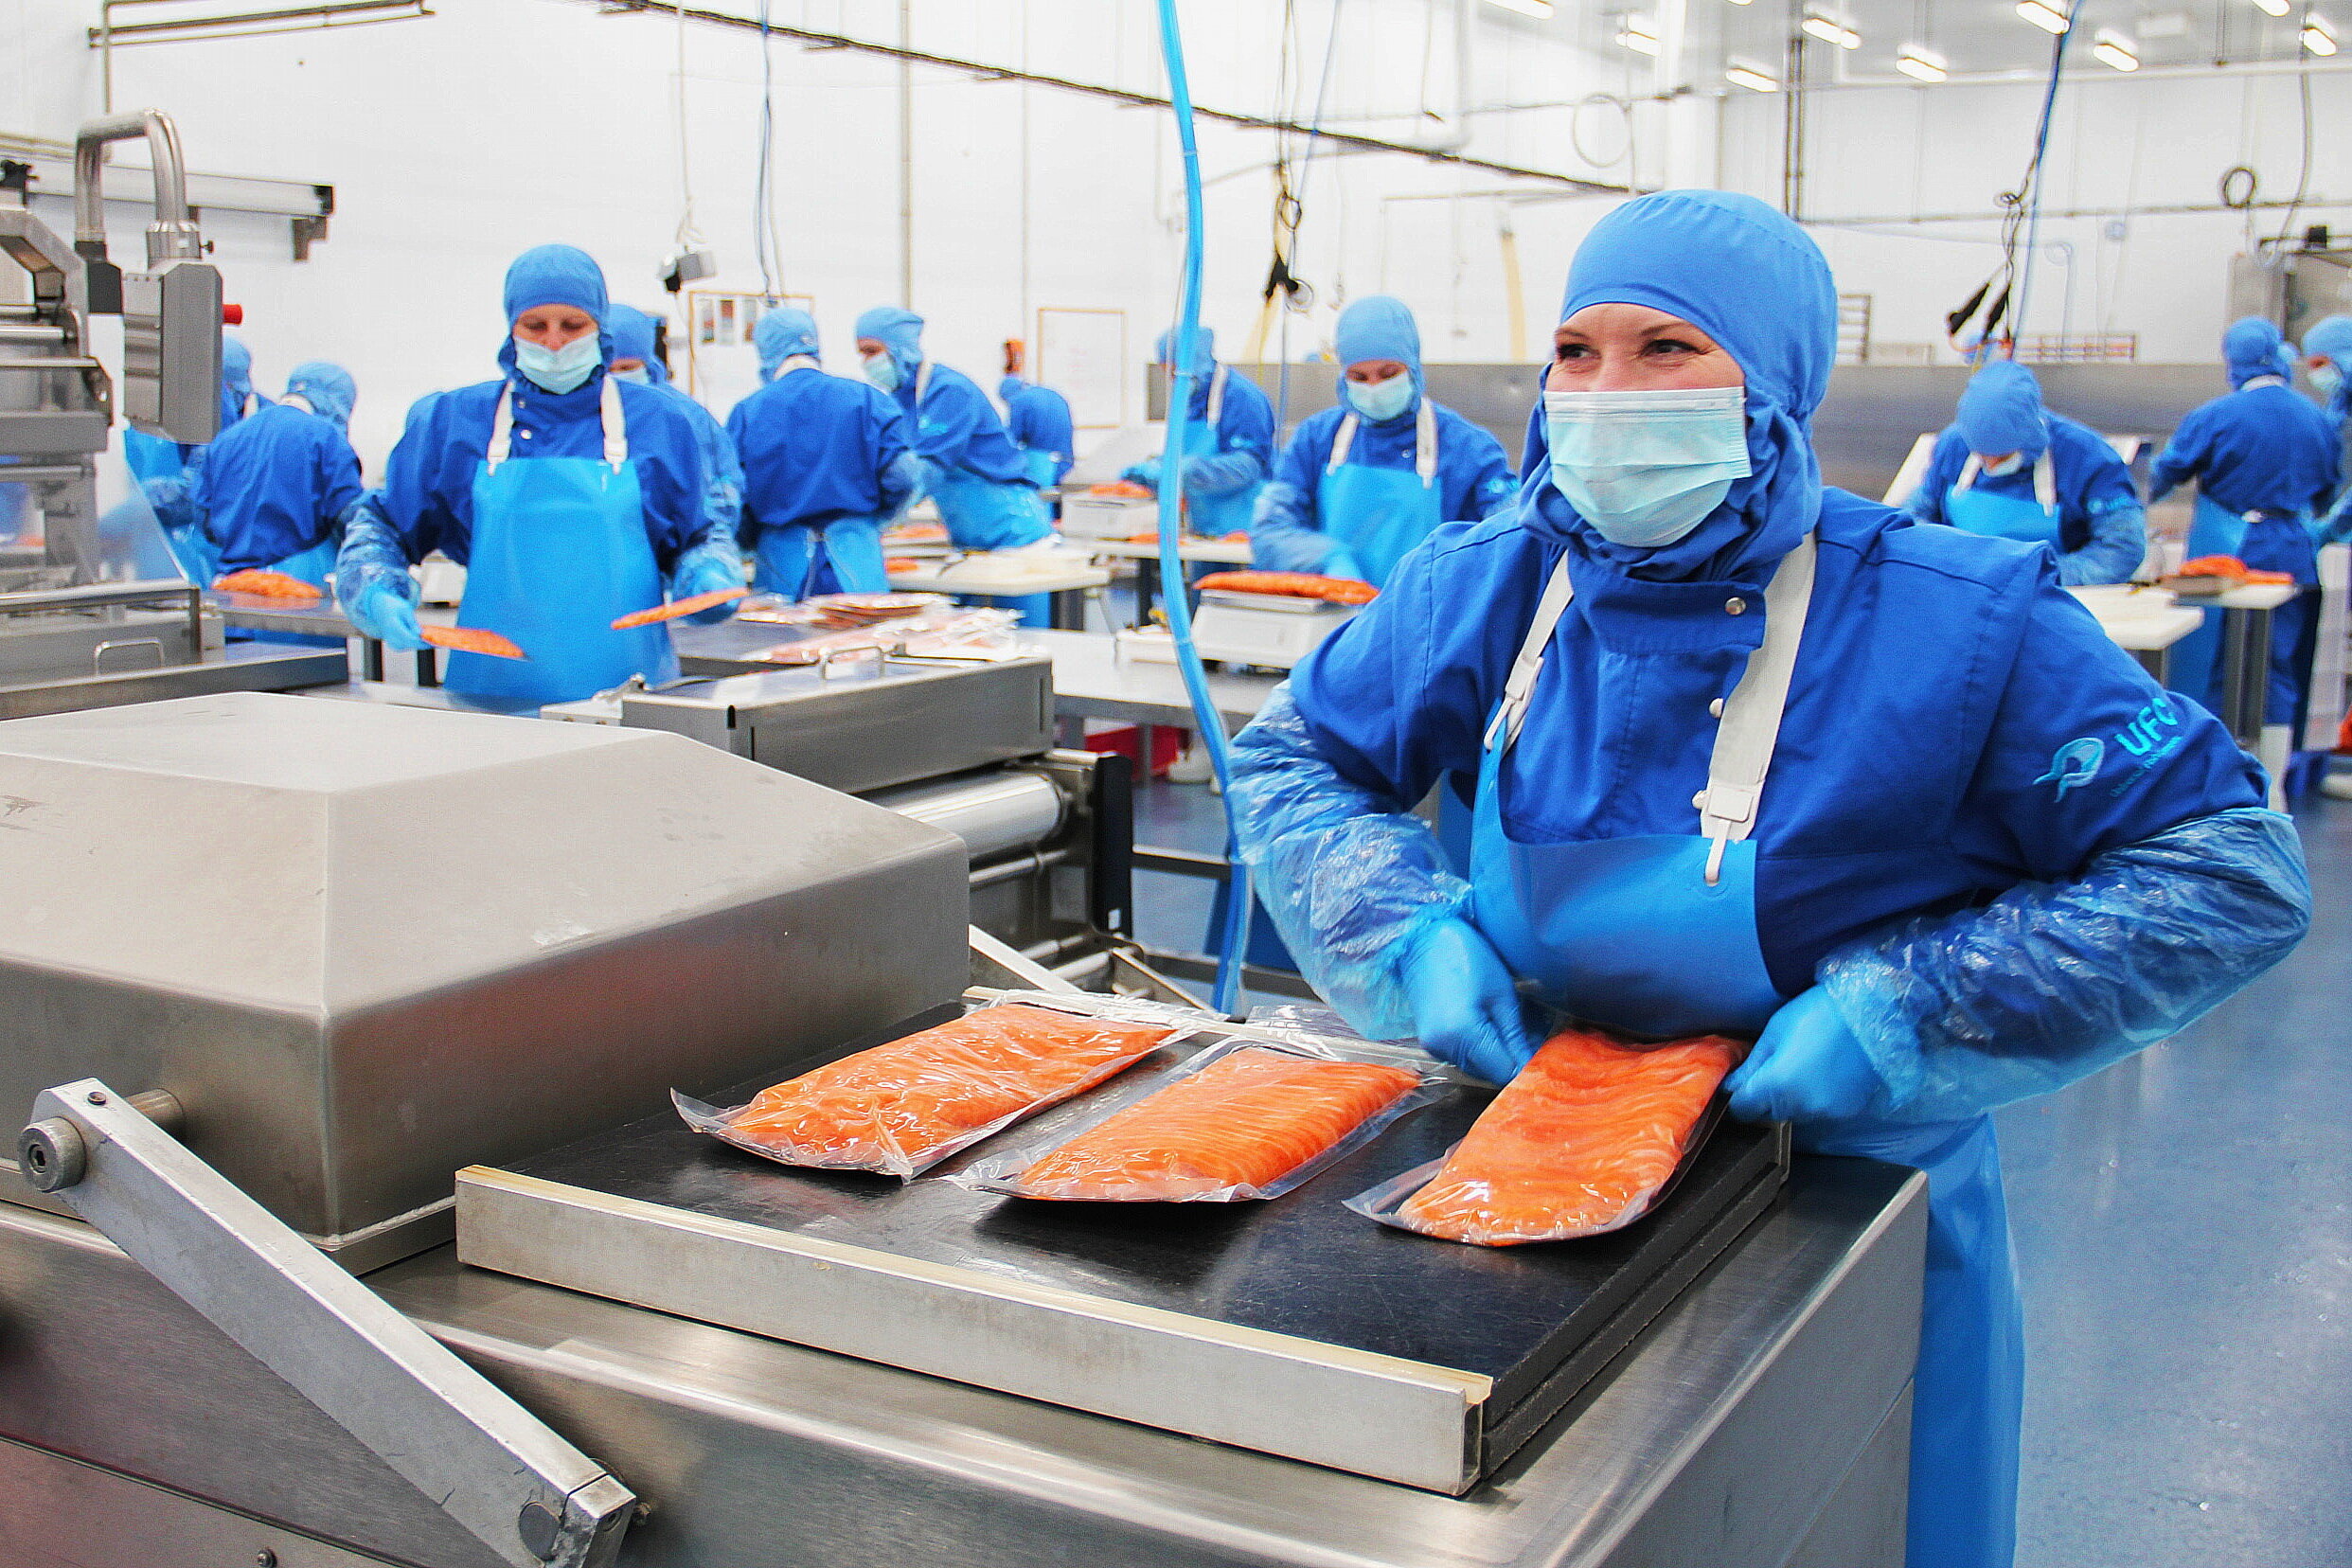 Could Ukraine become a hub for processing Norway’s fish?